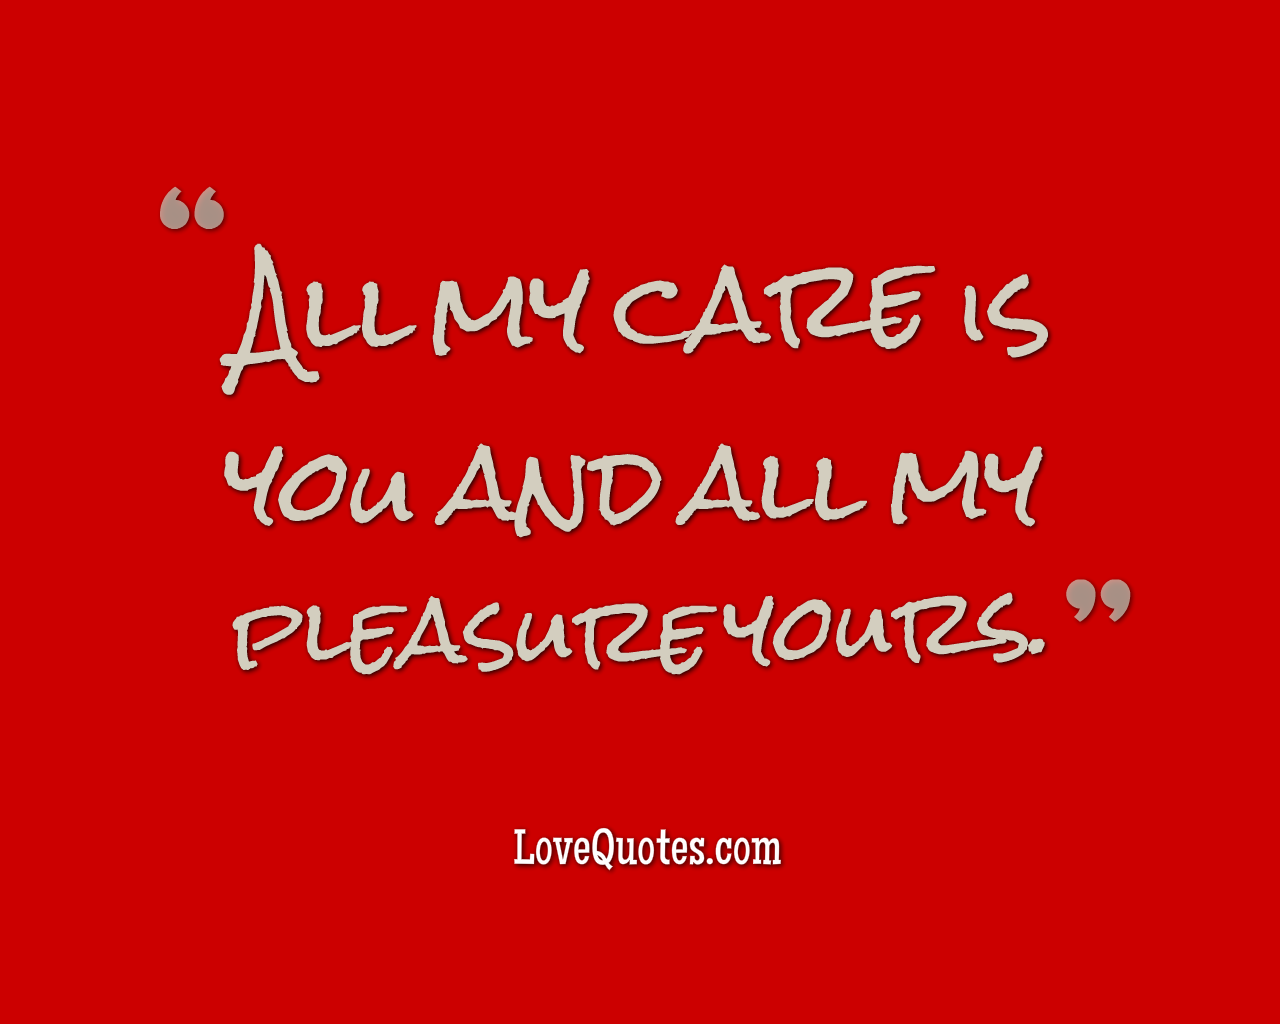 All My Care